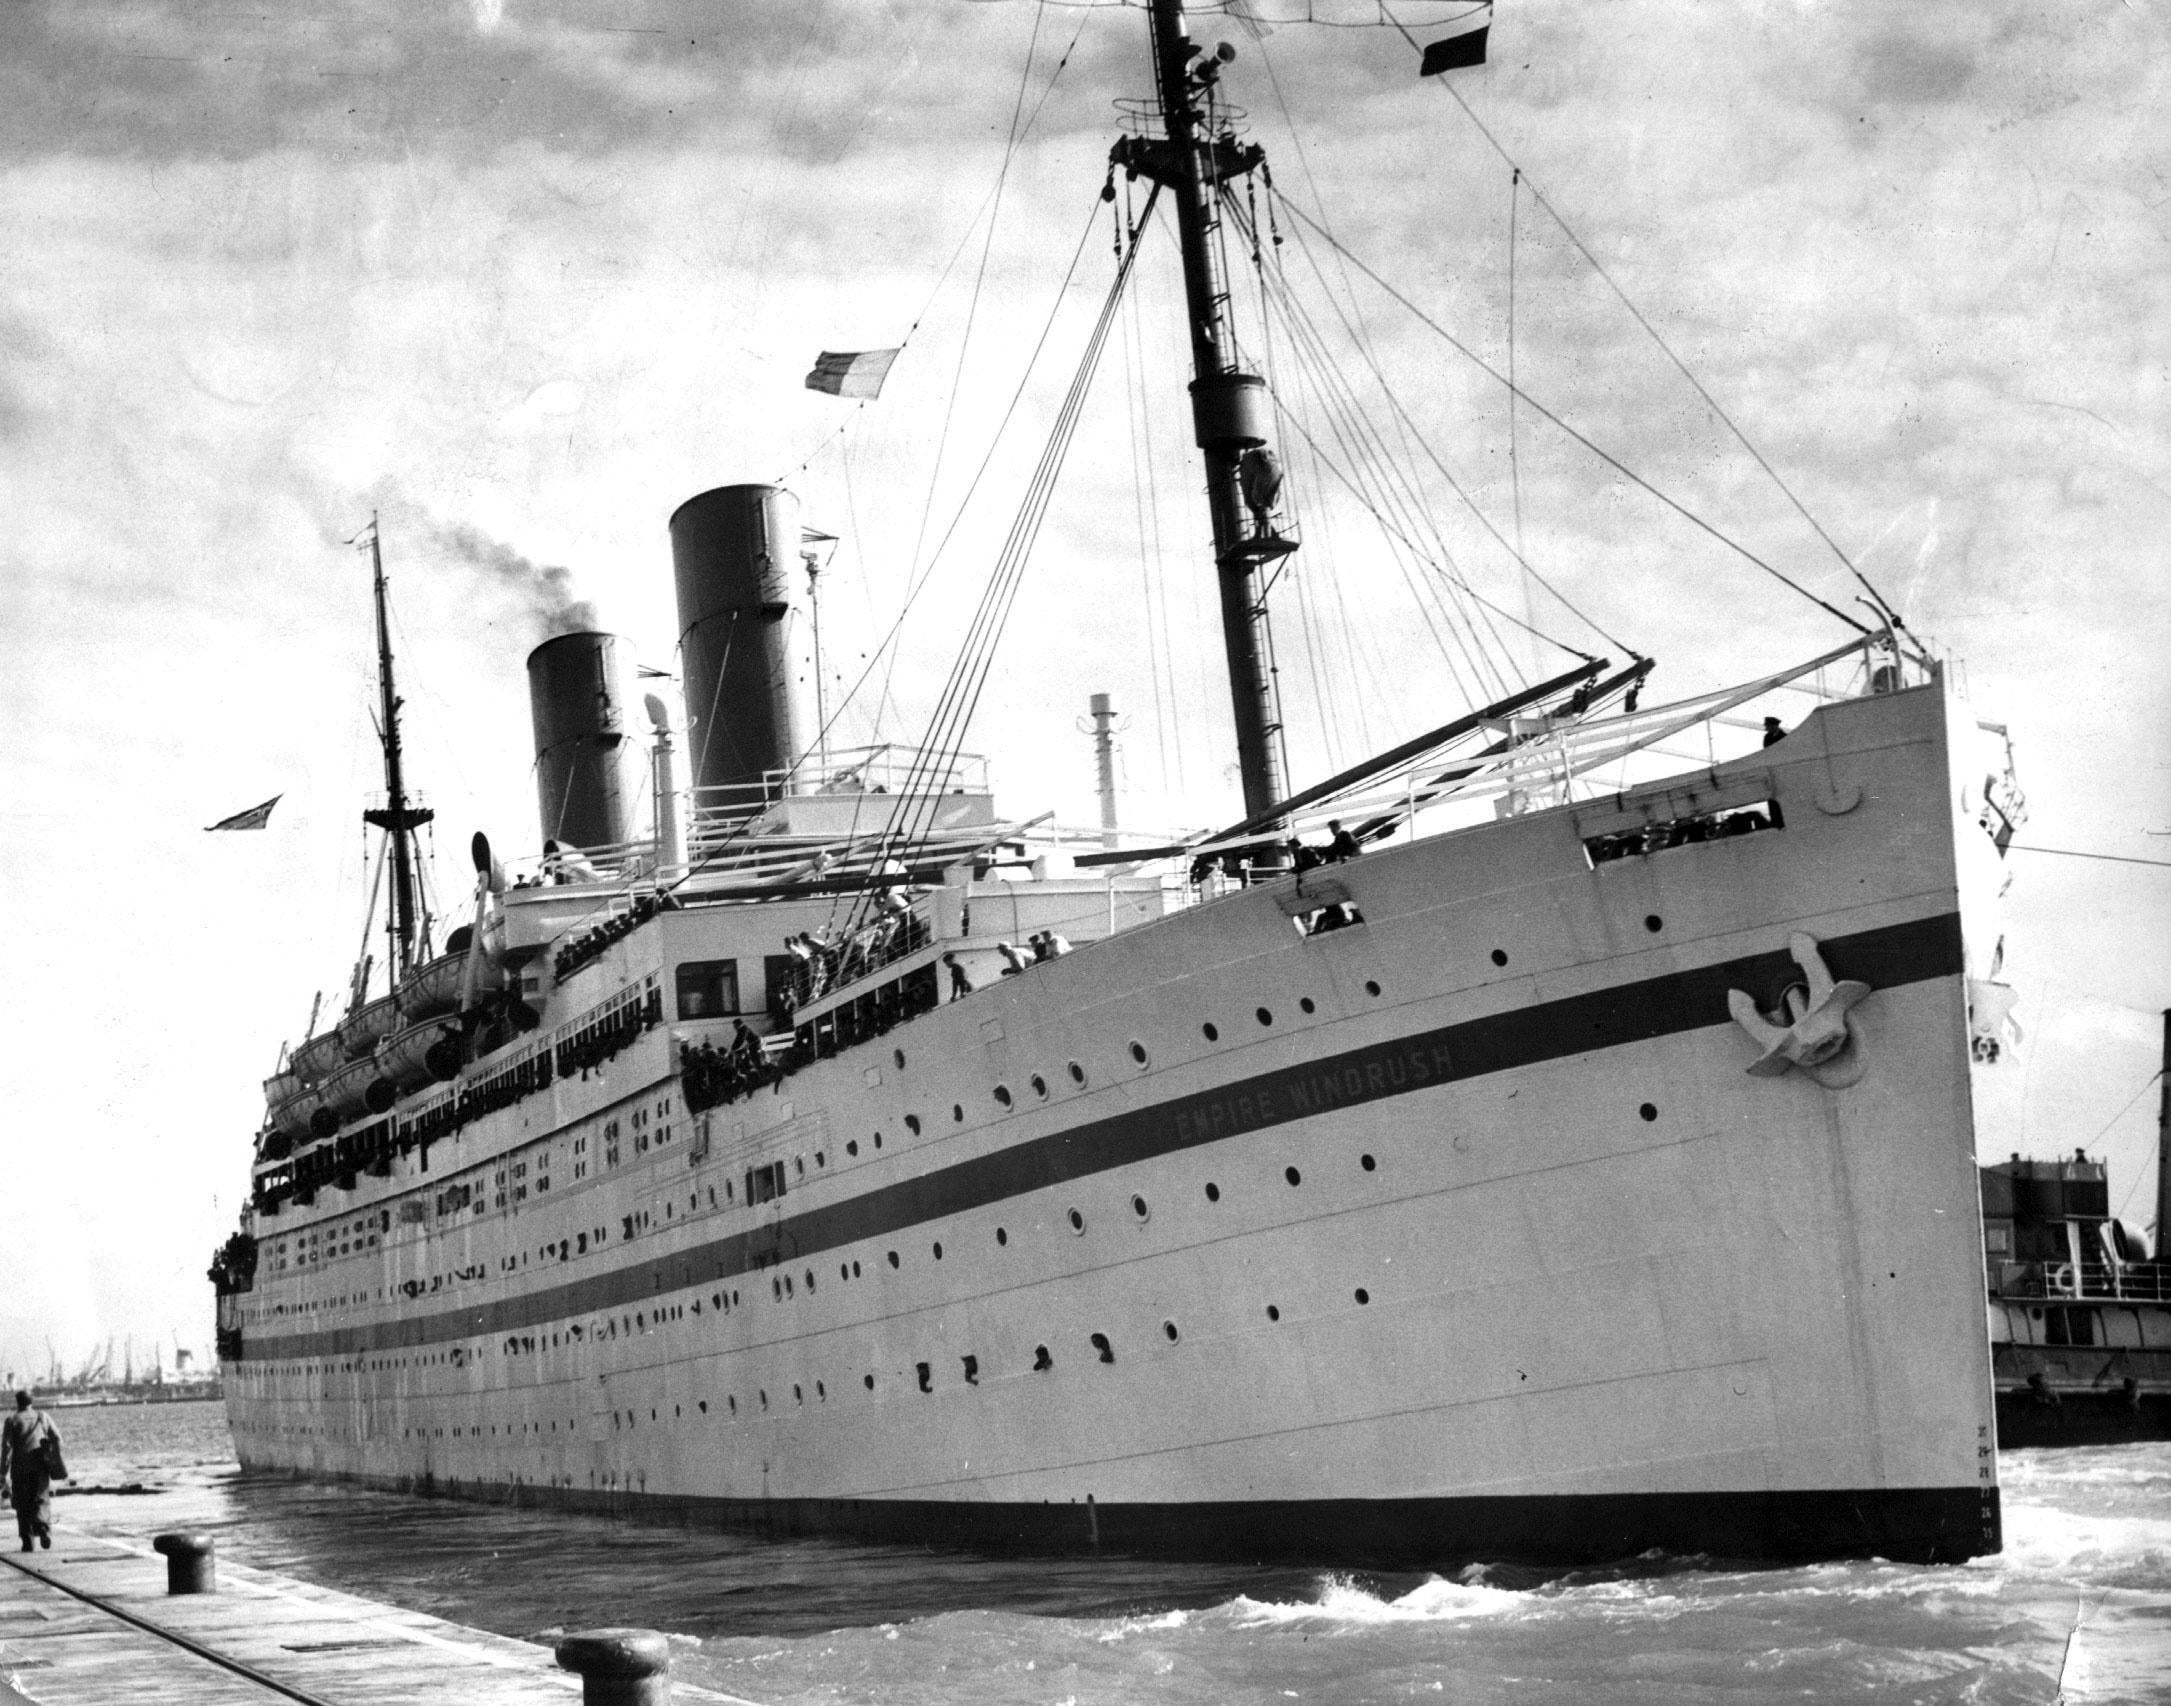 The ‘Windrush’ brought the first immigrants to the UK from the Caribbean